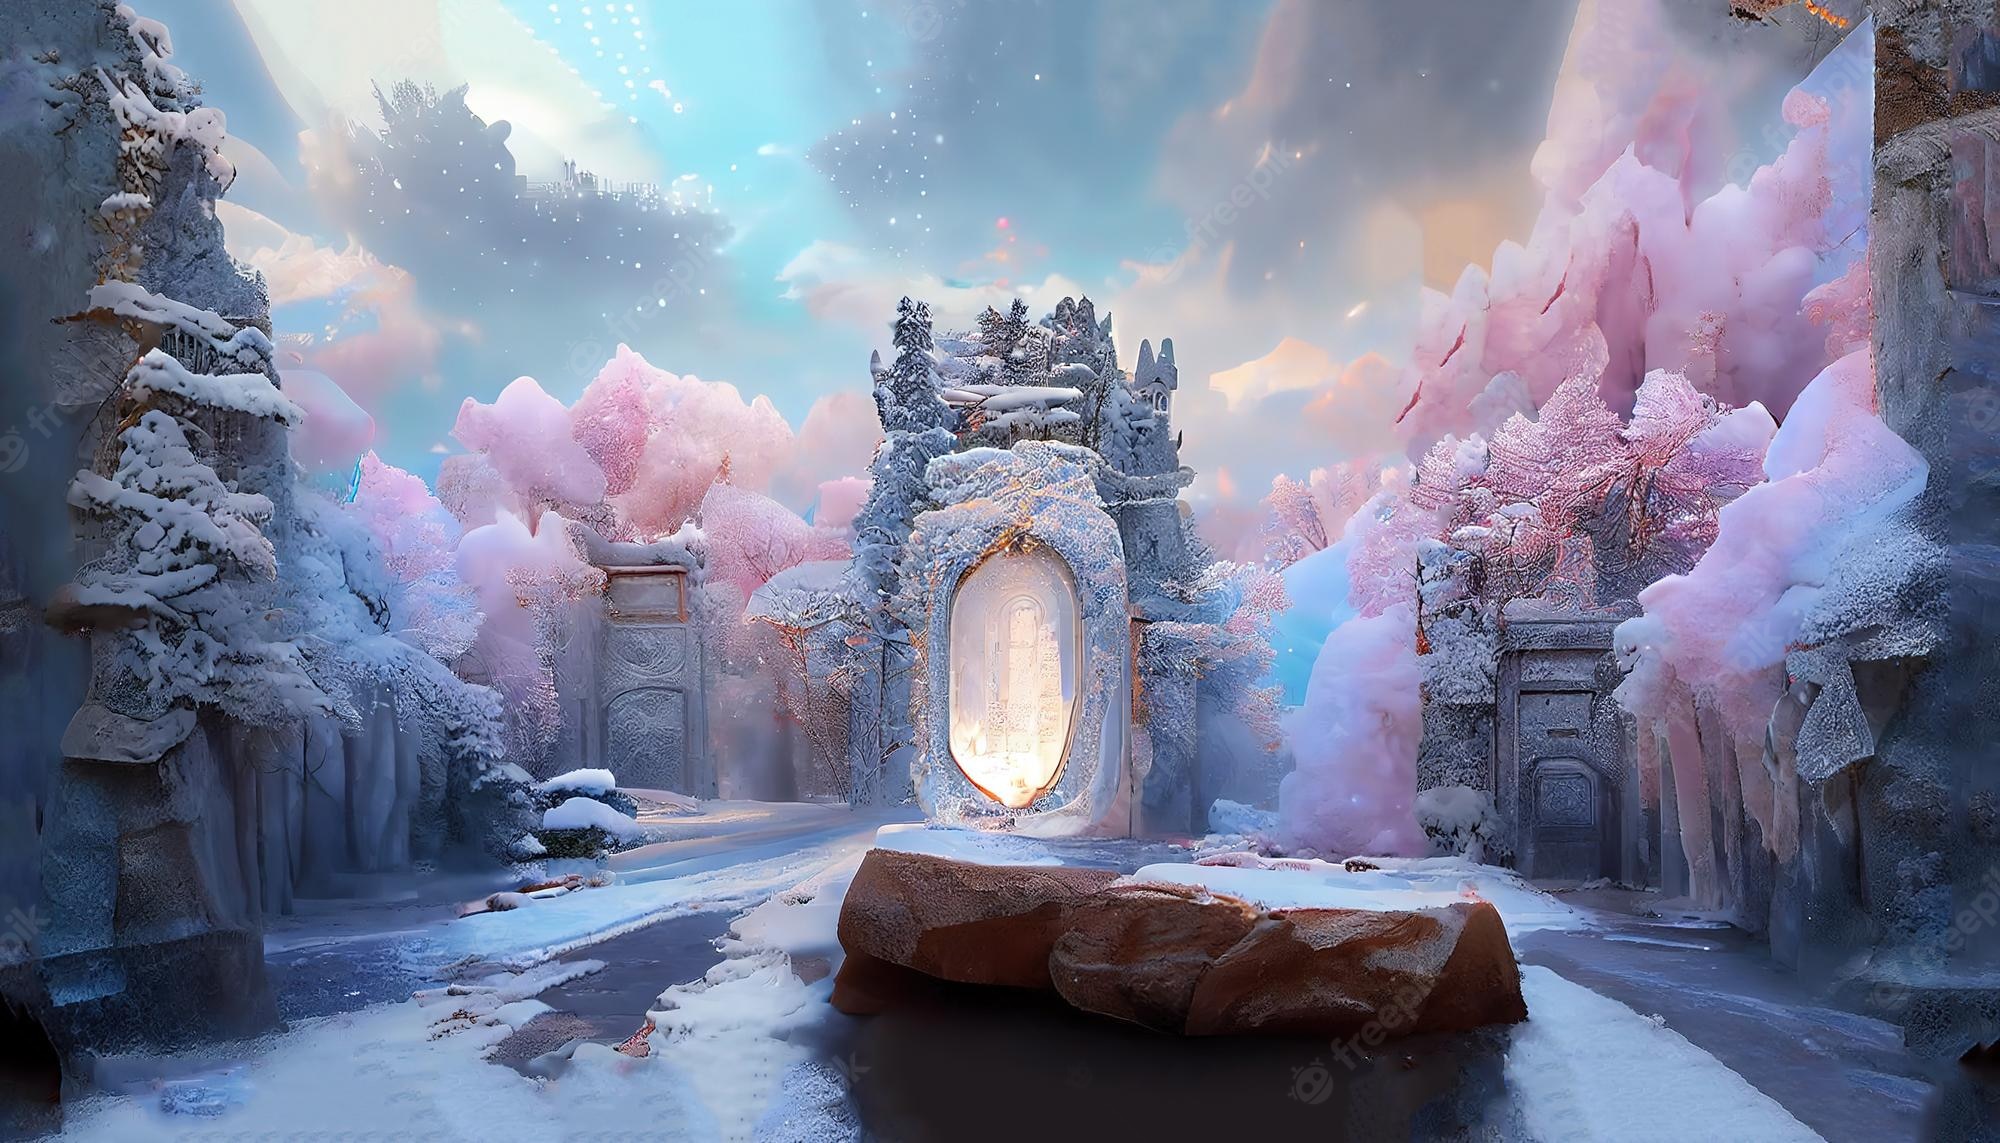 Premium Photo. Magical portal on winter landscape fairy tale background with ice crystal door mirror or gate with fantasy castle snowy landscape with glowing entrance on rock under cloudy gray sky